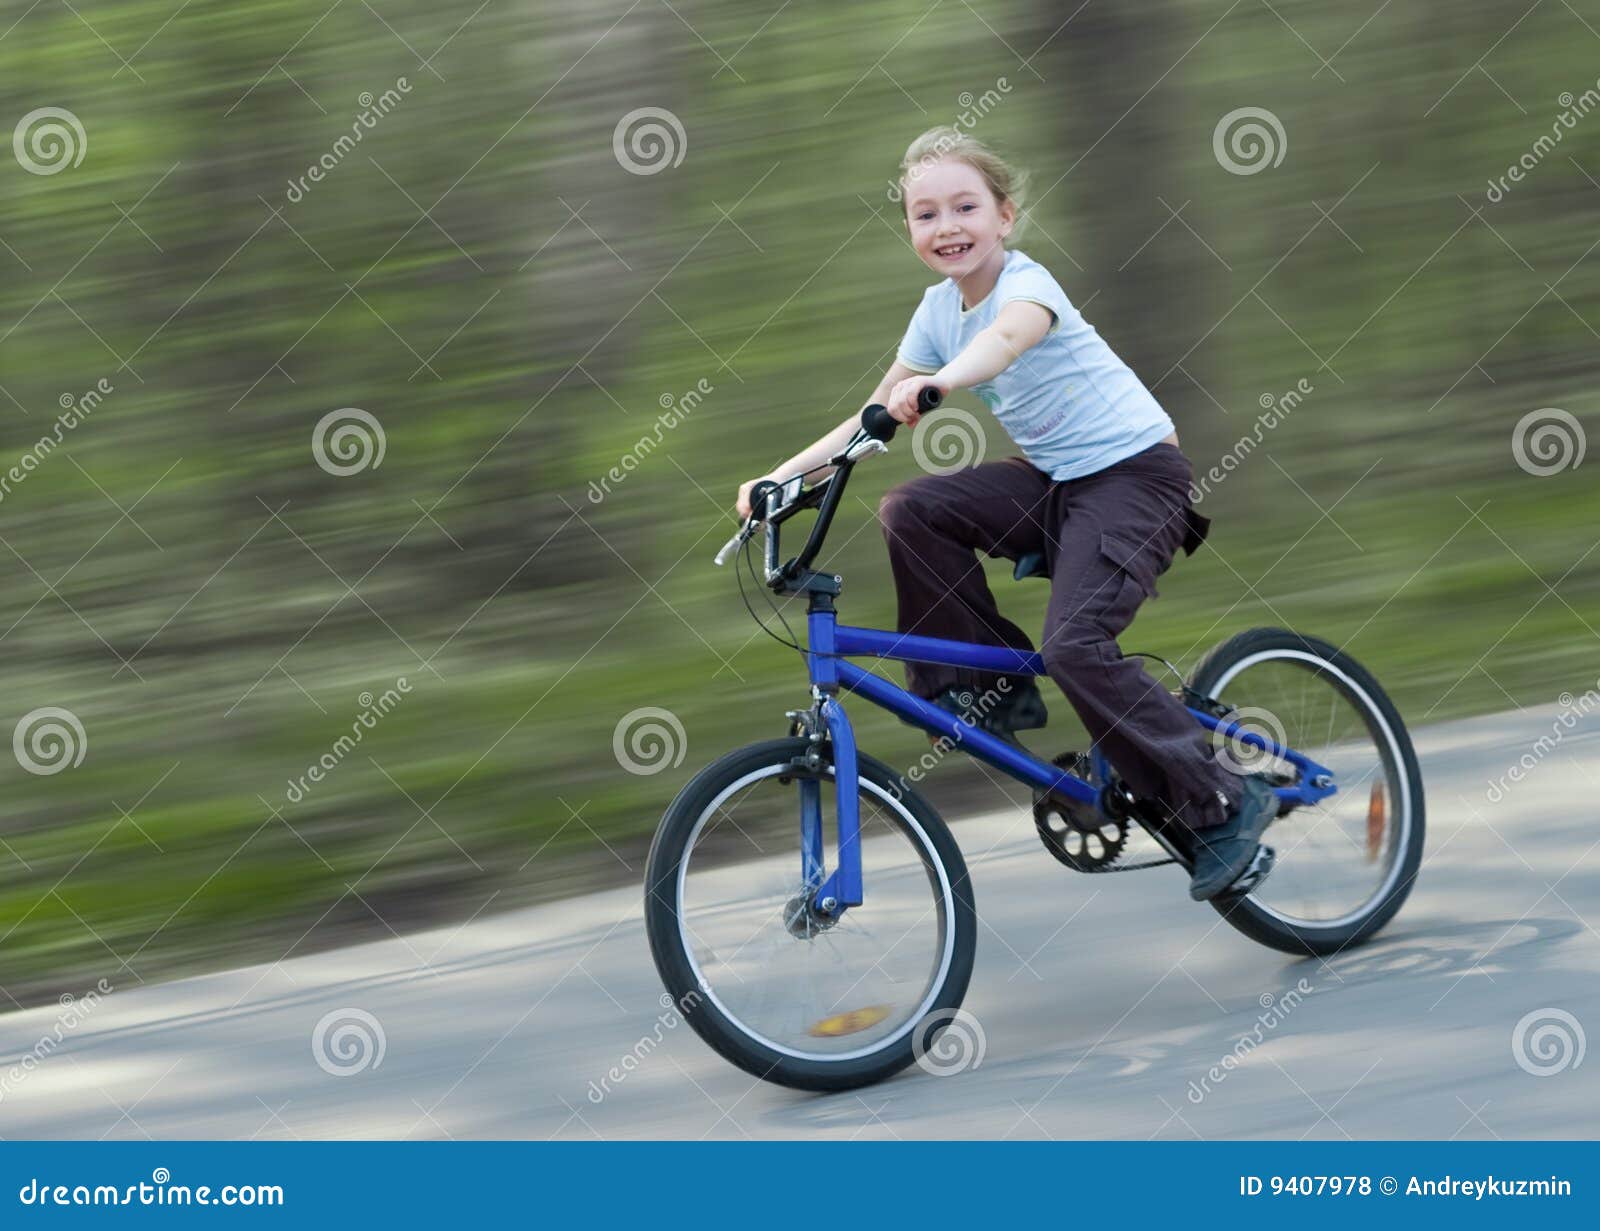 Image result for images of happy bike rider